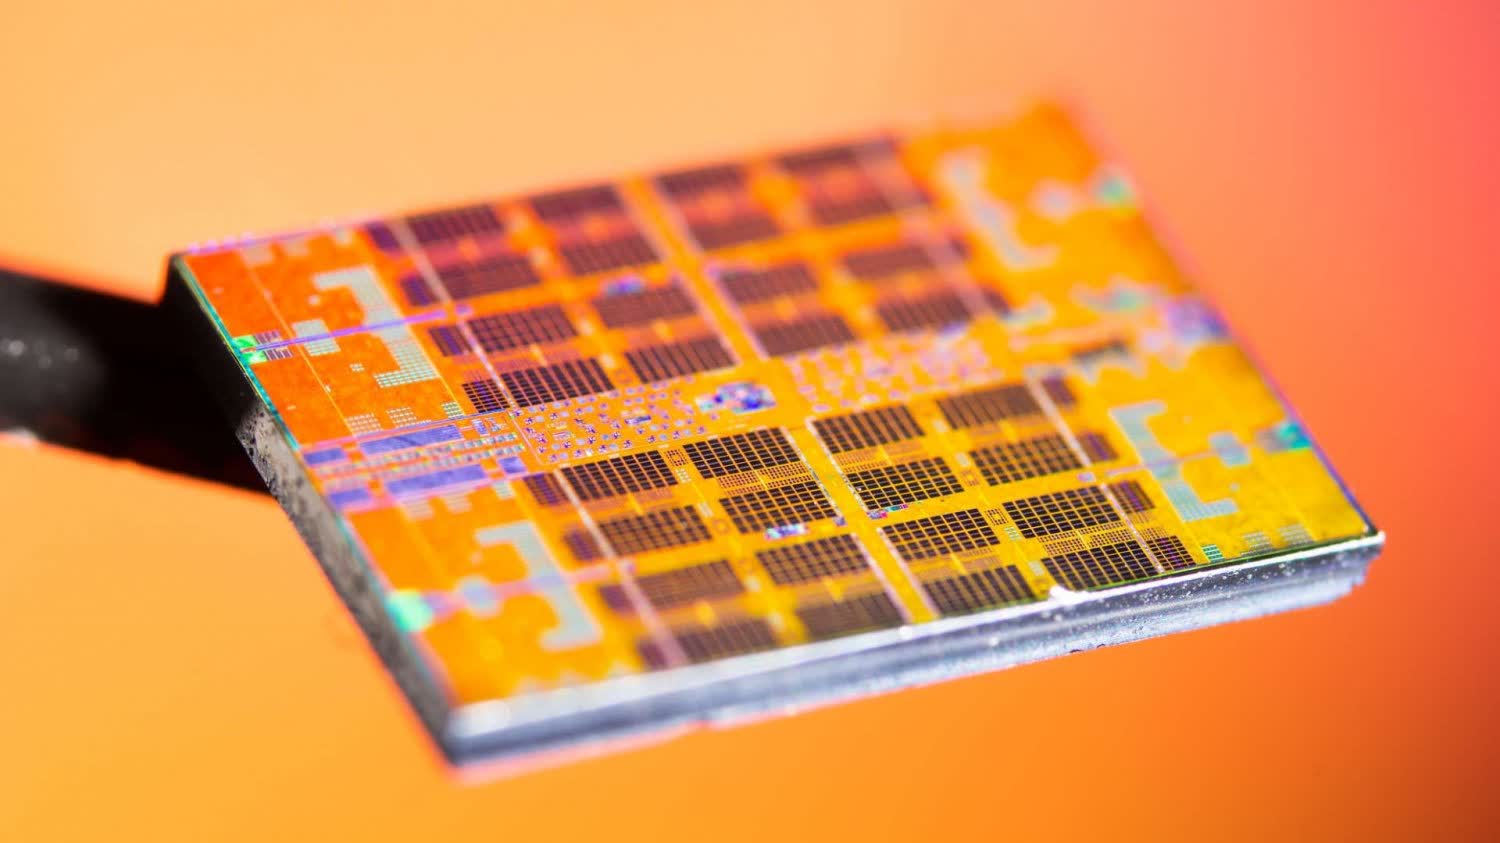 Chipmakers are expected to spend $146 billion on capacity expansions this year